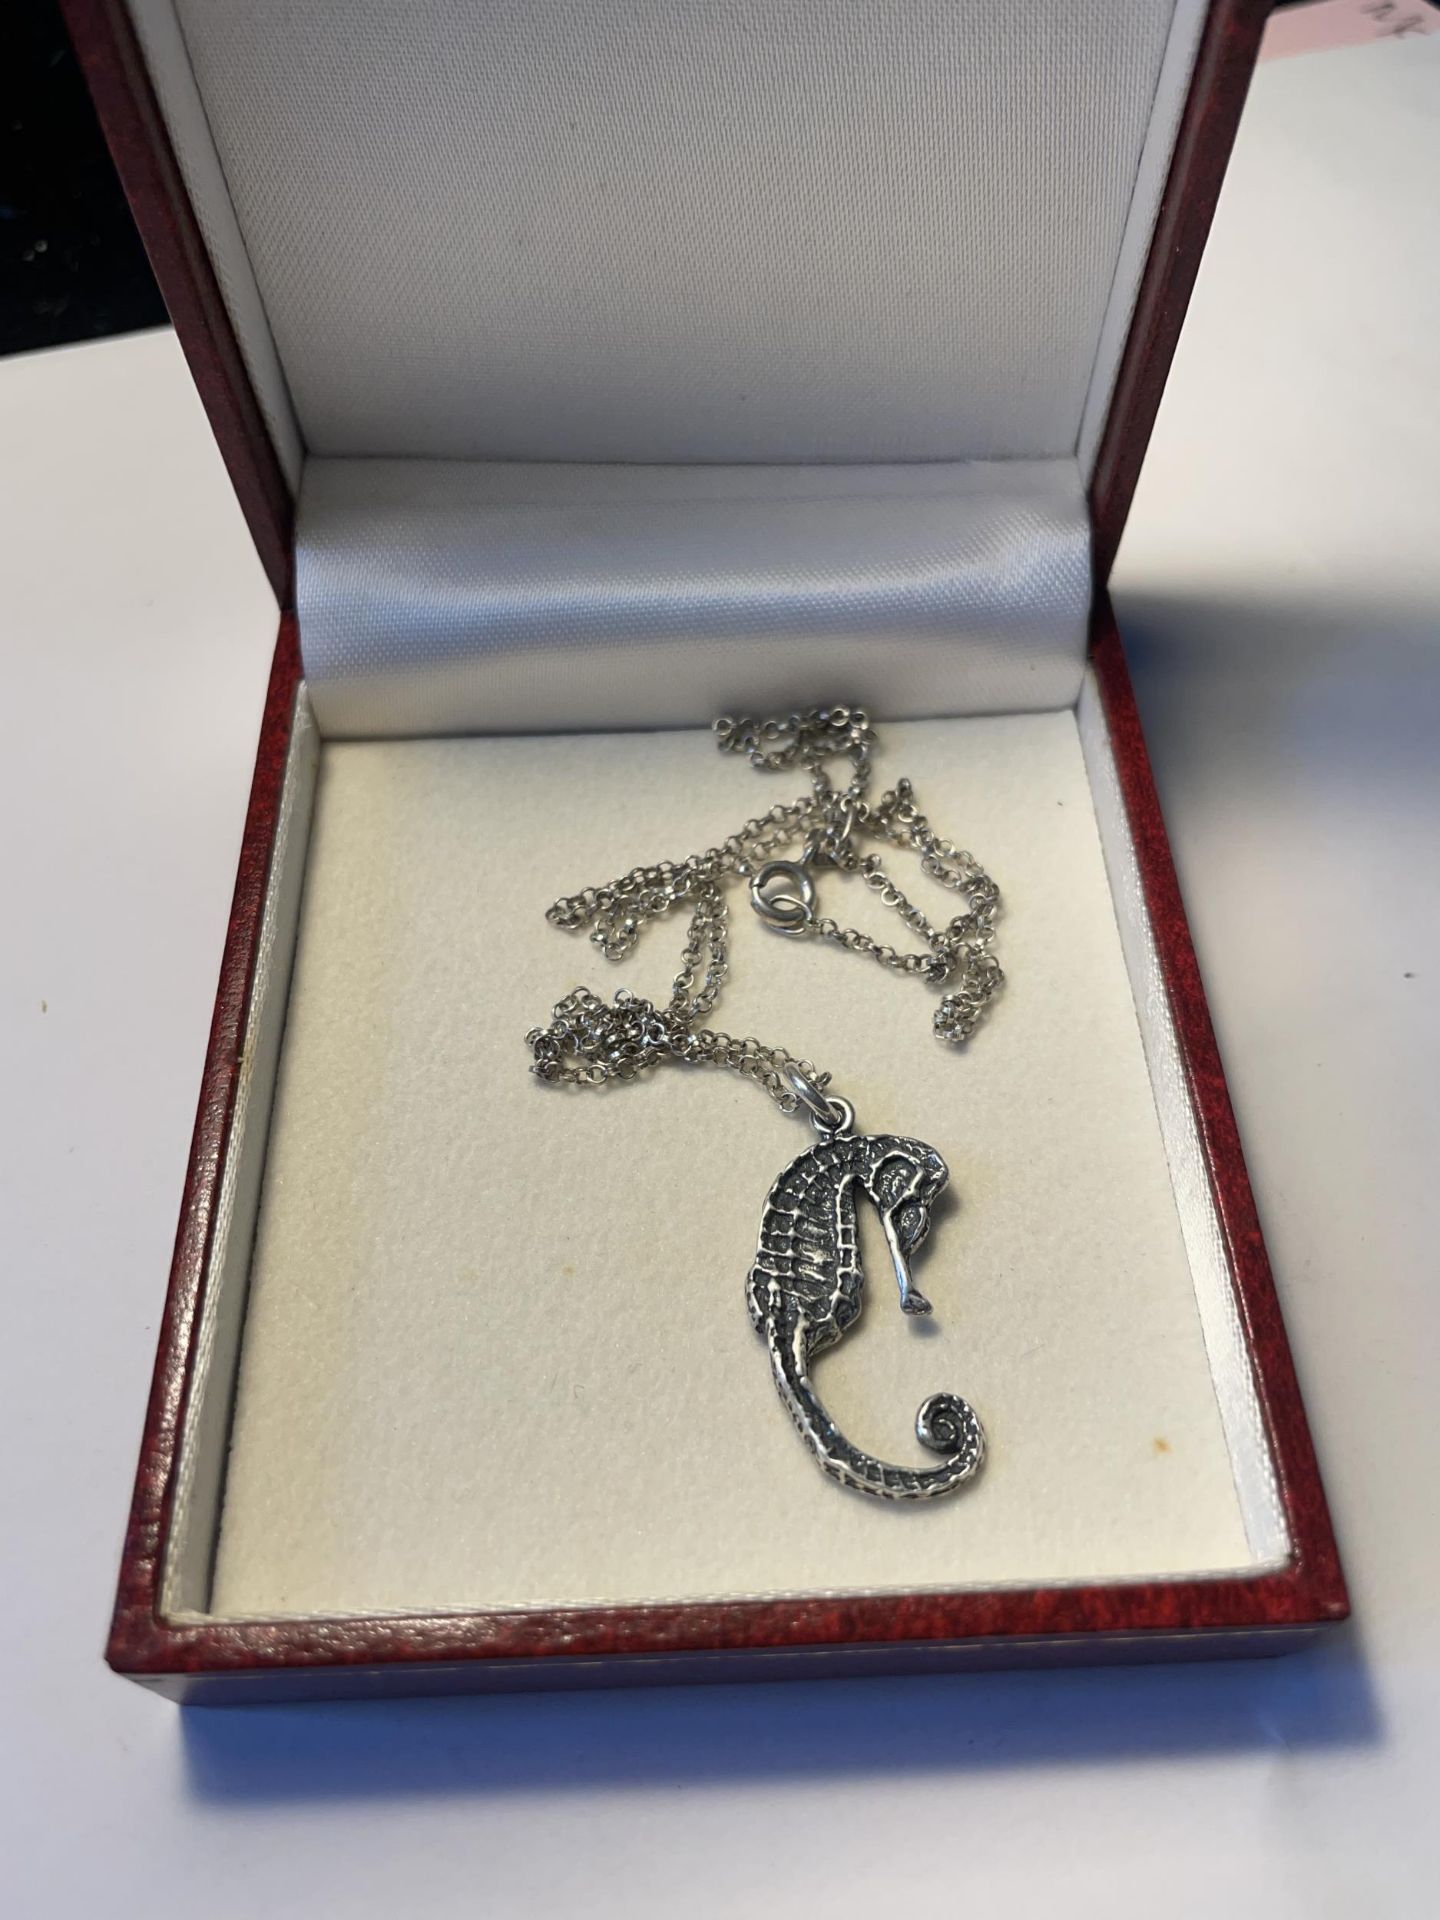 A MARKED 925 SILVER SEAHORSE PENDANT ON A NECKLACE IN A PRESENTATION BOX